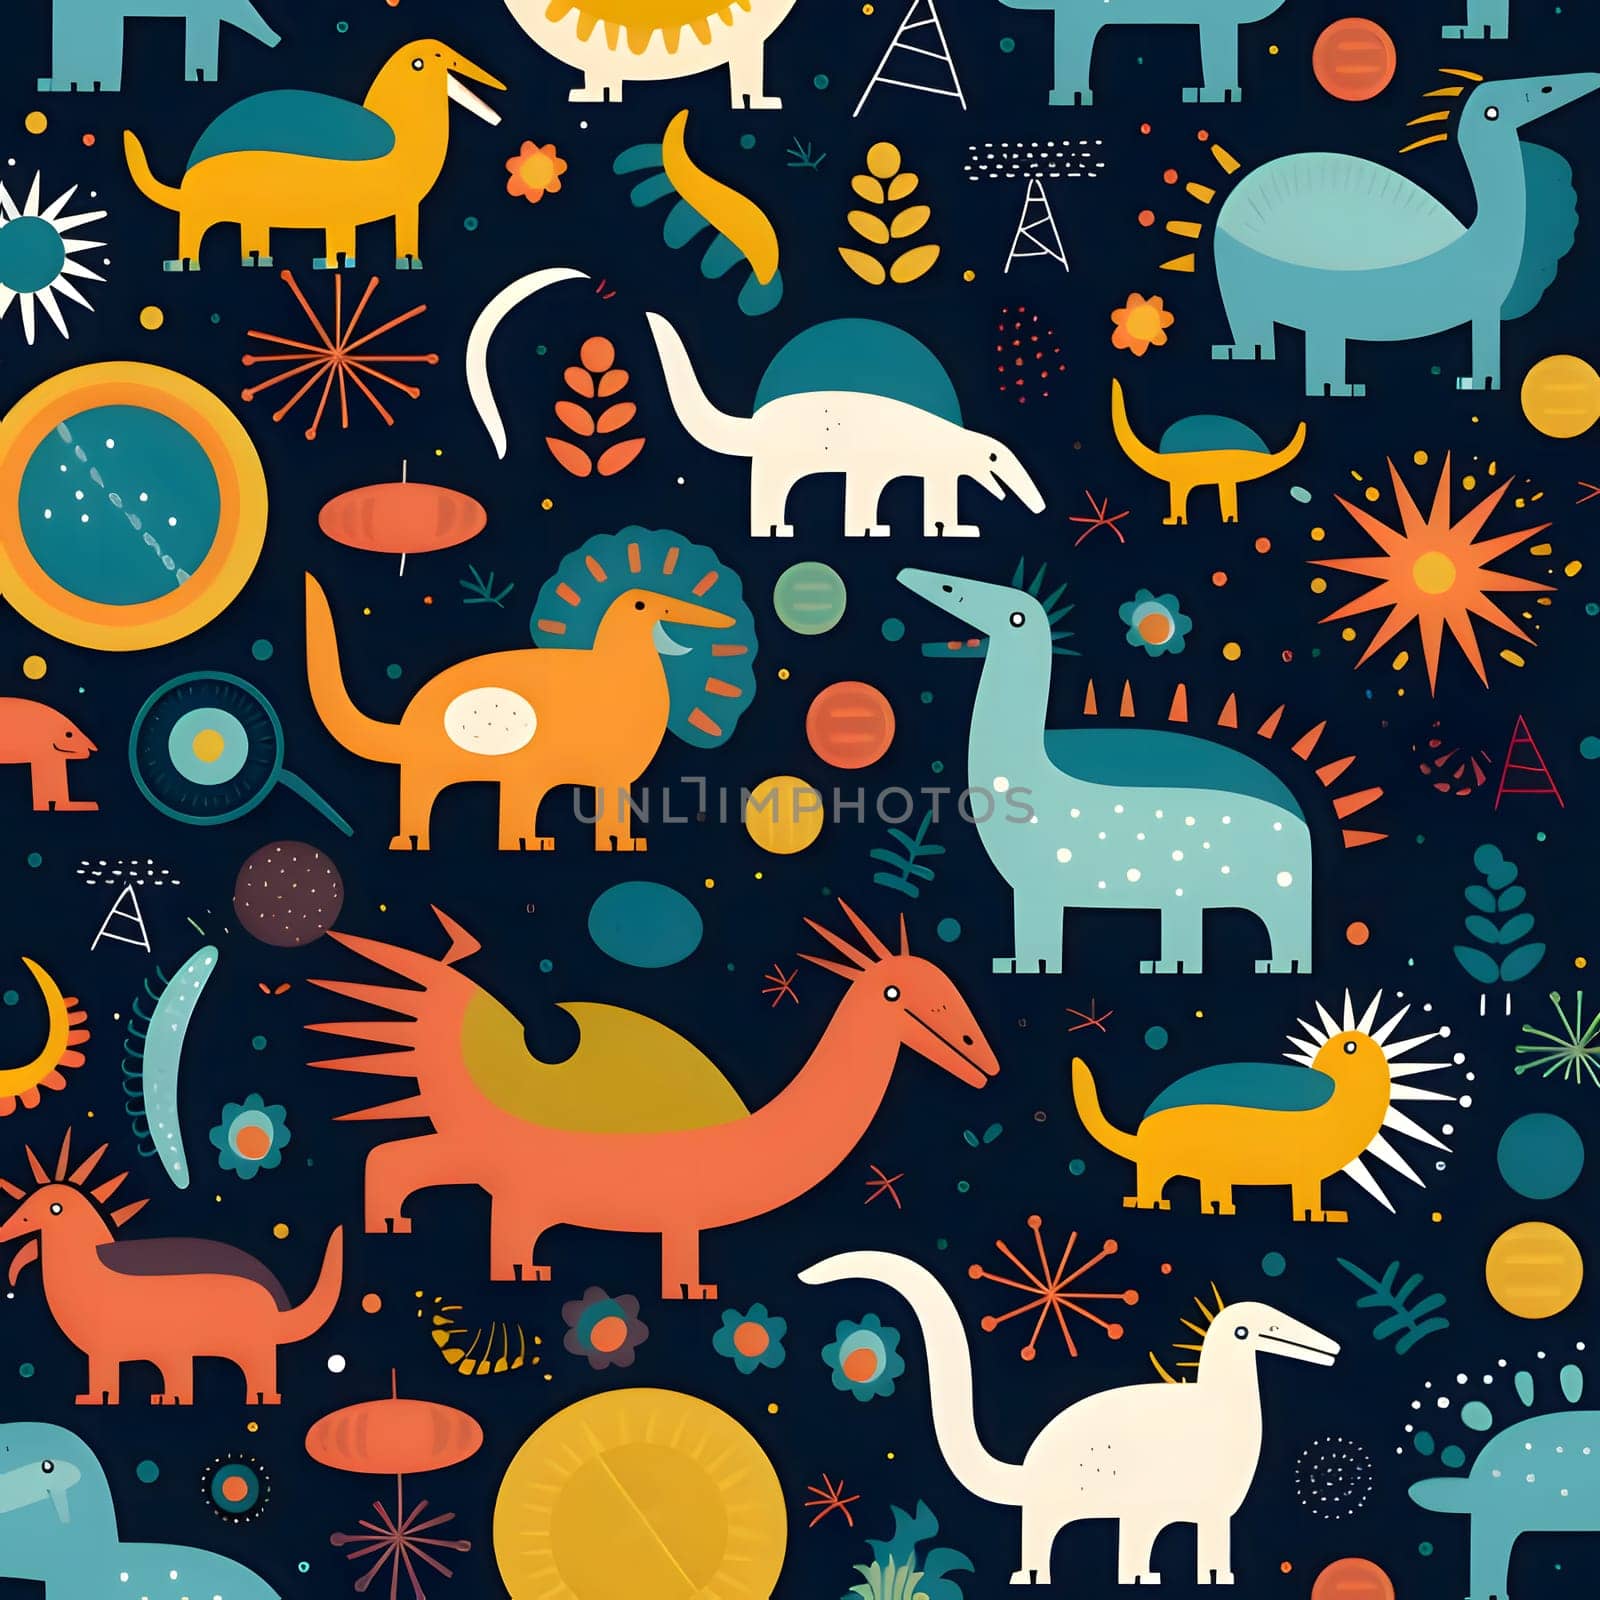 Patterns and banners backgrounds: Seamless pattern with cute dinosaurs. Vector illustration in scandinavian style